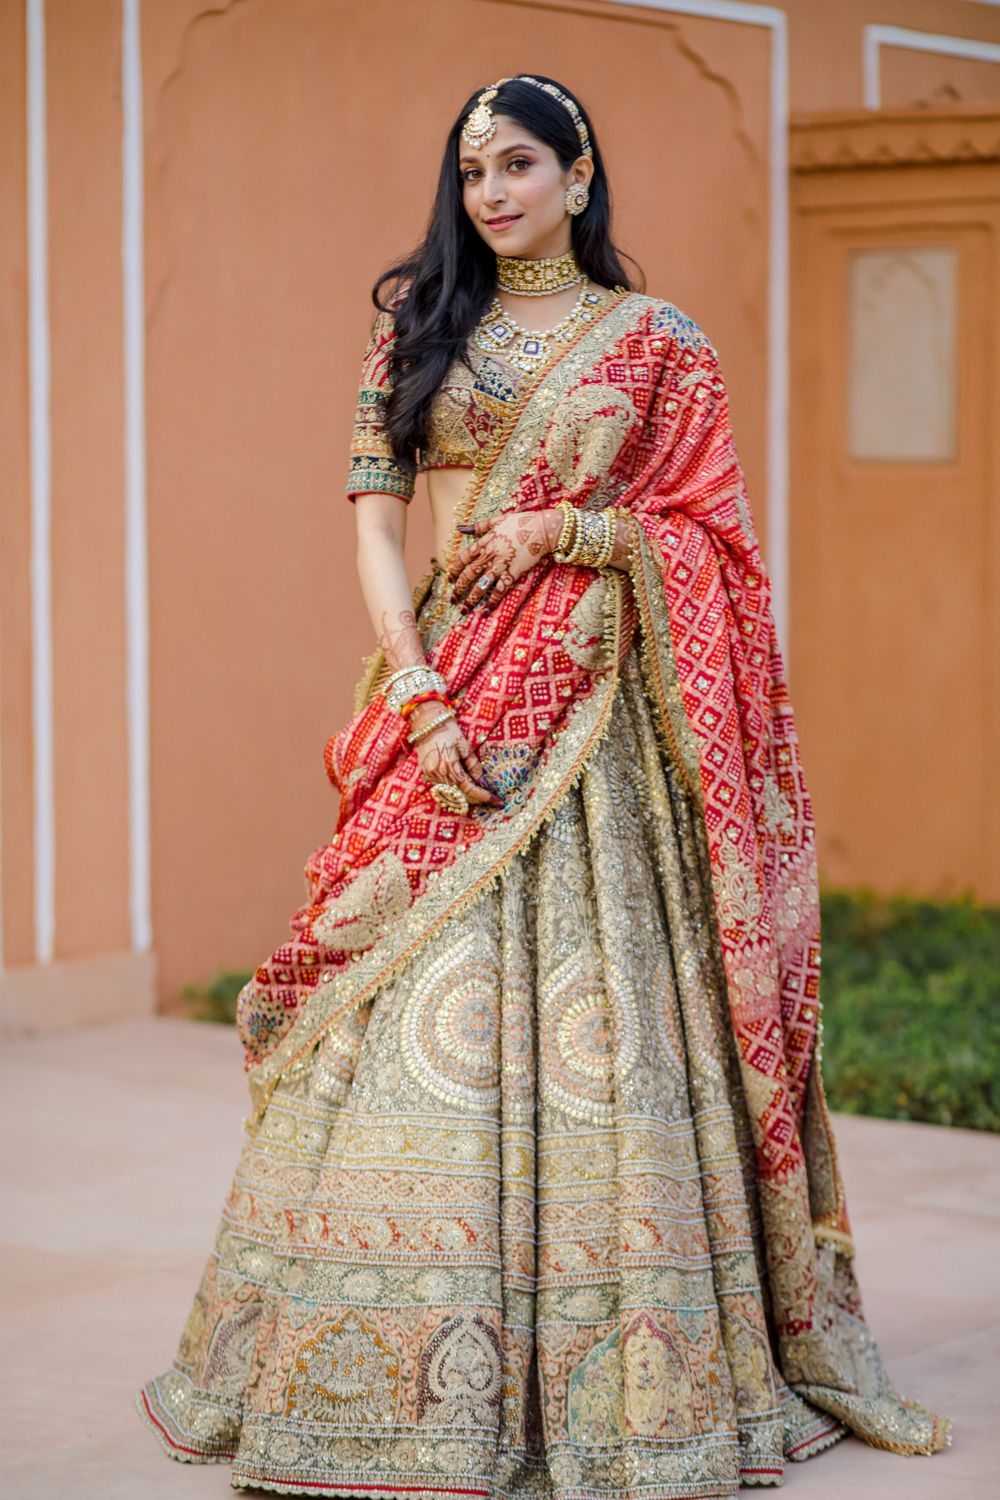 Photo of Bride wearing a heavy lehenga with a red bandhani dupatta.